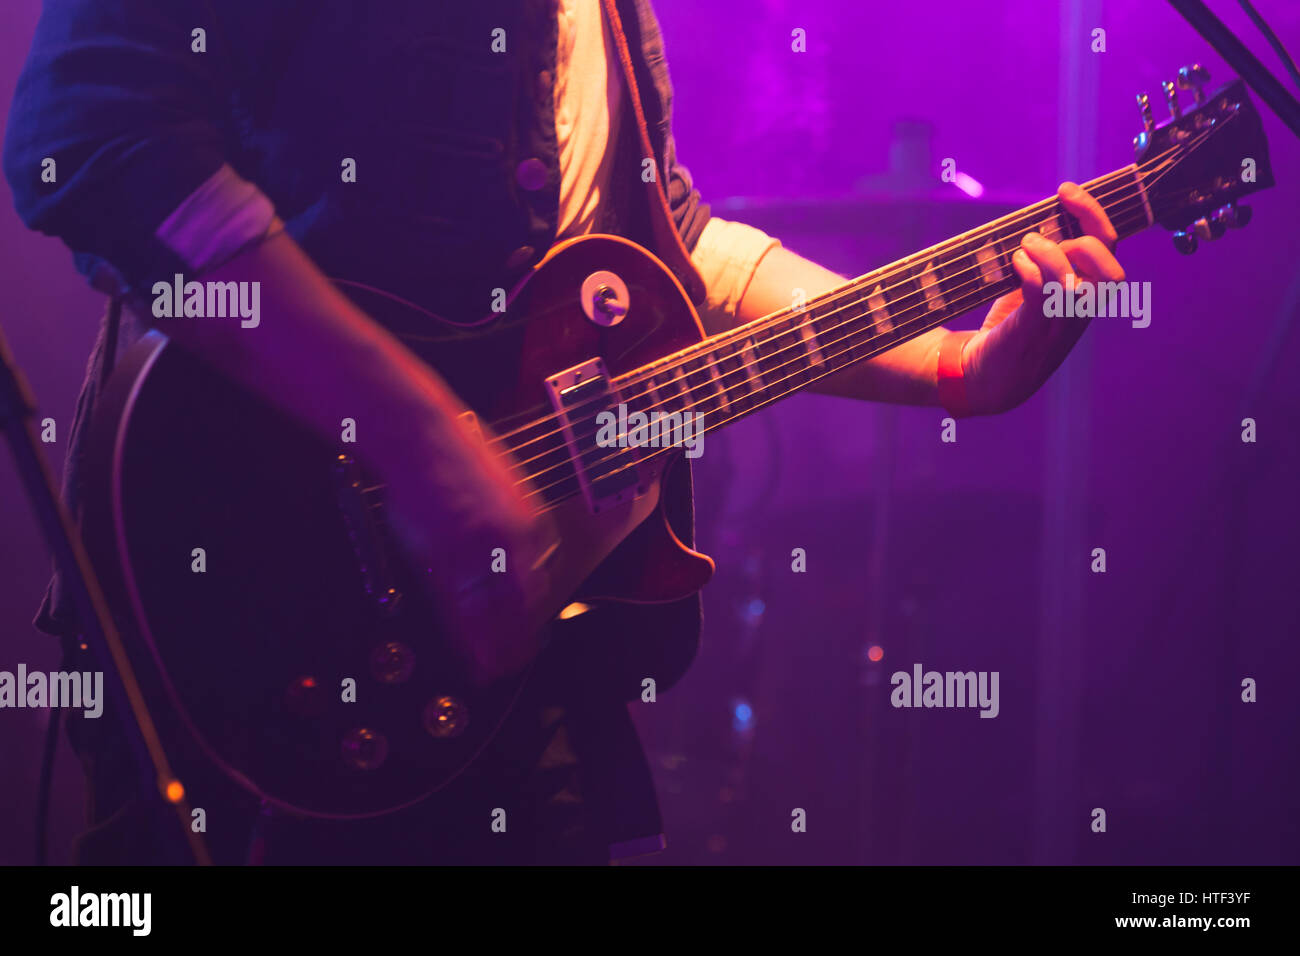 Electric guitar player on stage with purple scenic illumination, soft selective focus Stock Photo